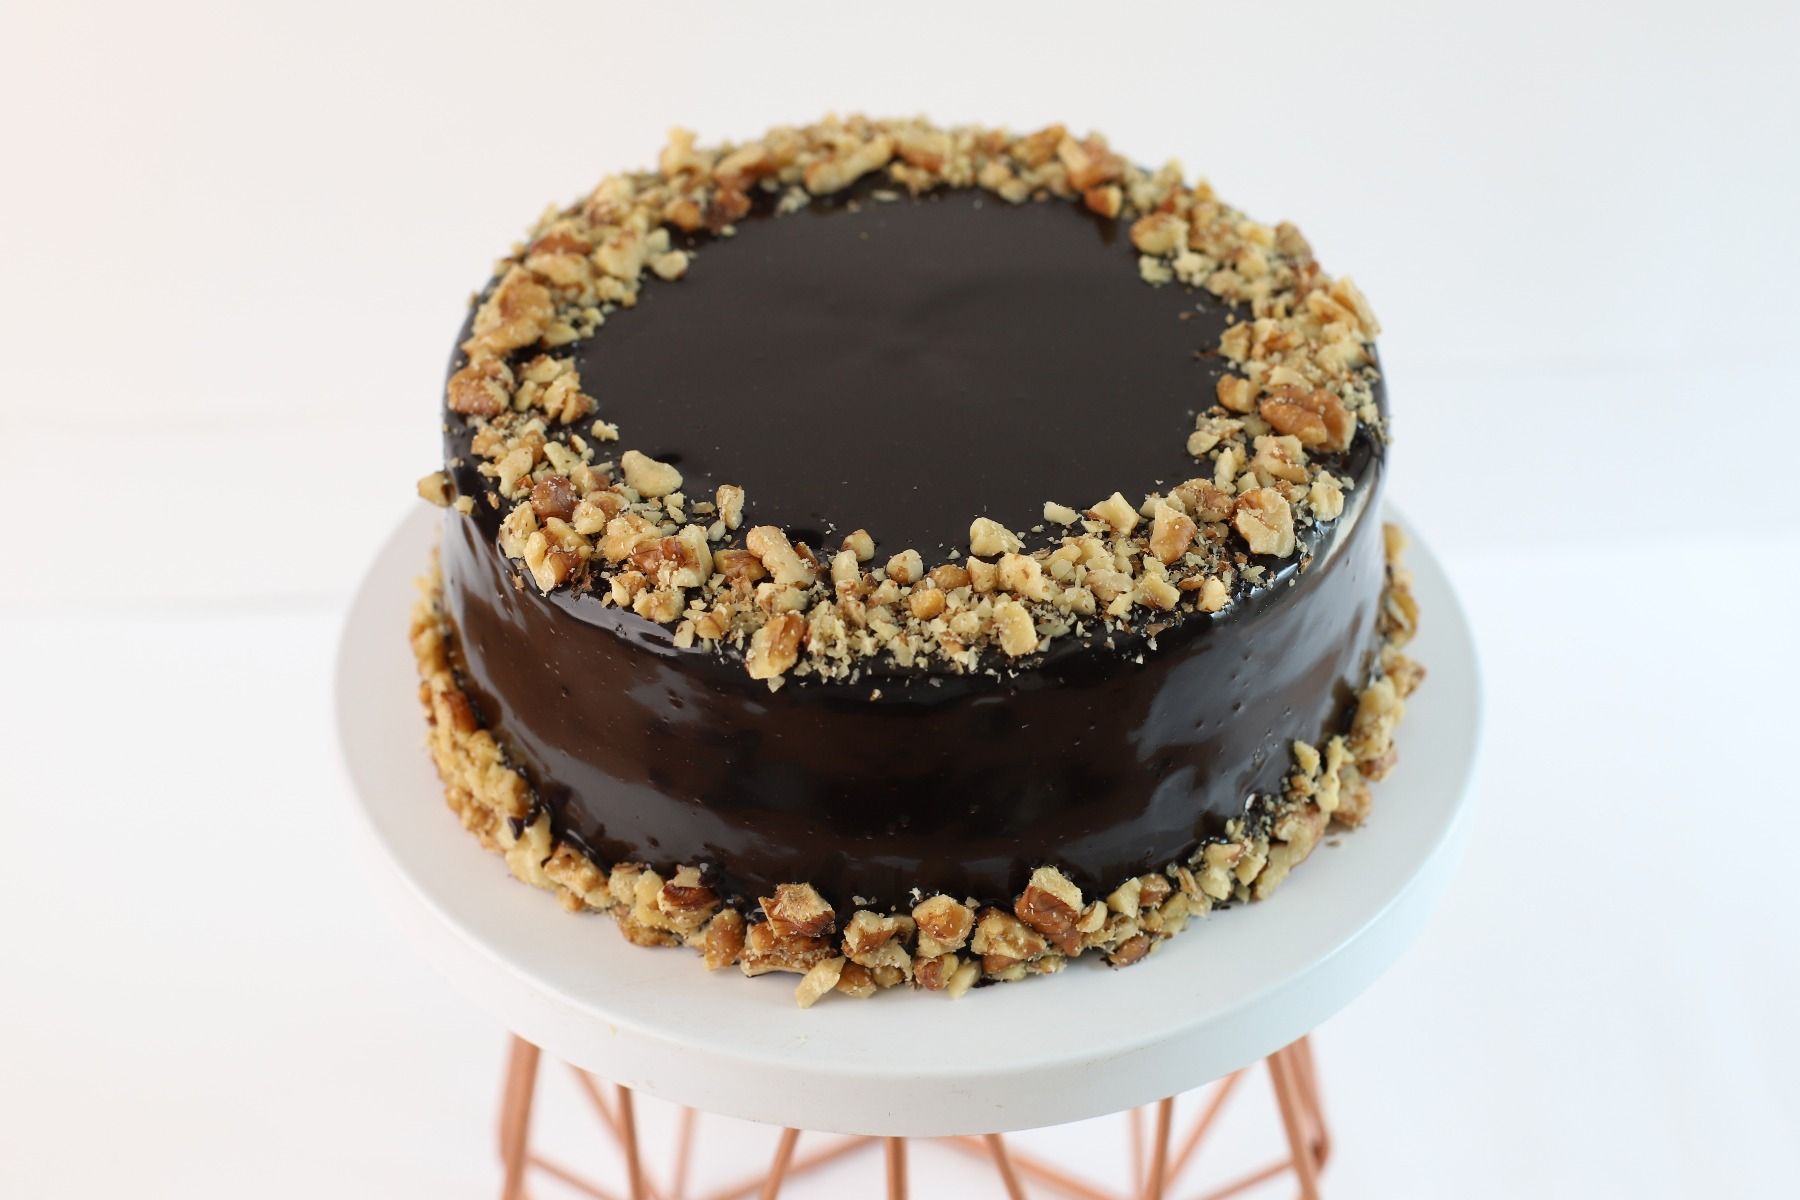 Ferrero Rocher Cake with Meringue Layers and Nutella Frosting